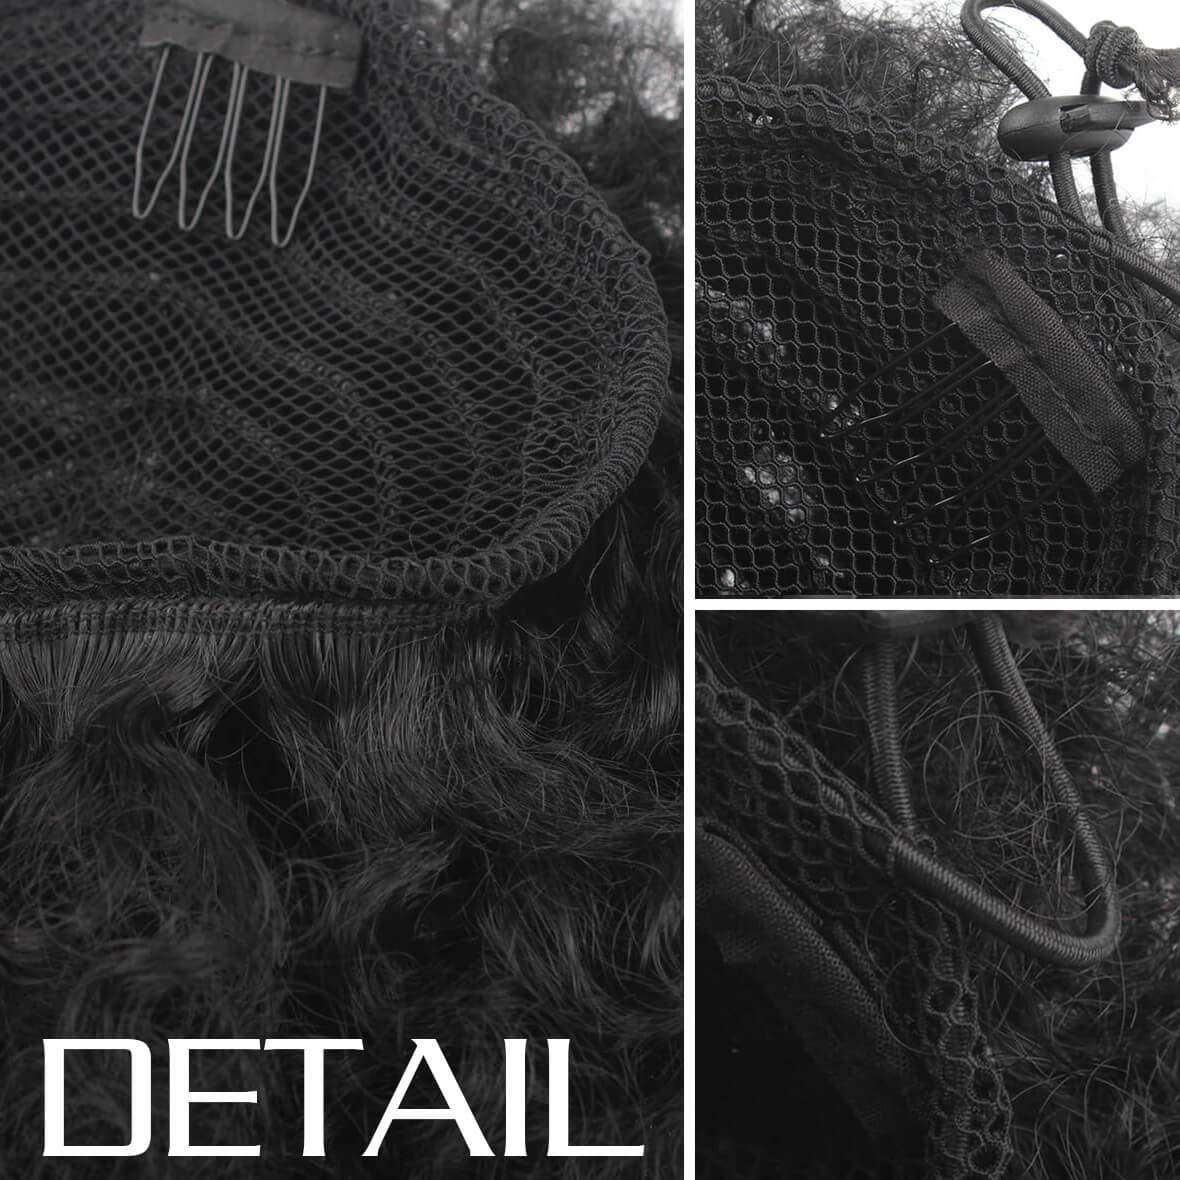 Xtrend Short African Kinky Curly Wrap Drawstring Puff Ponytail Hair Extensions Wig with 2 Clips Afro Ponytail Drawstring For Black Women